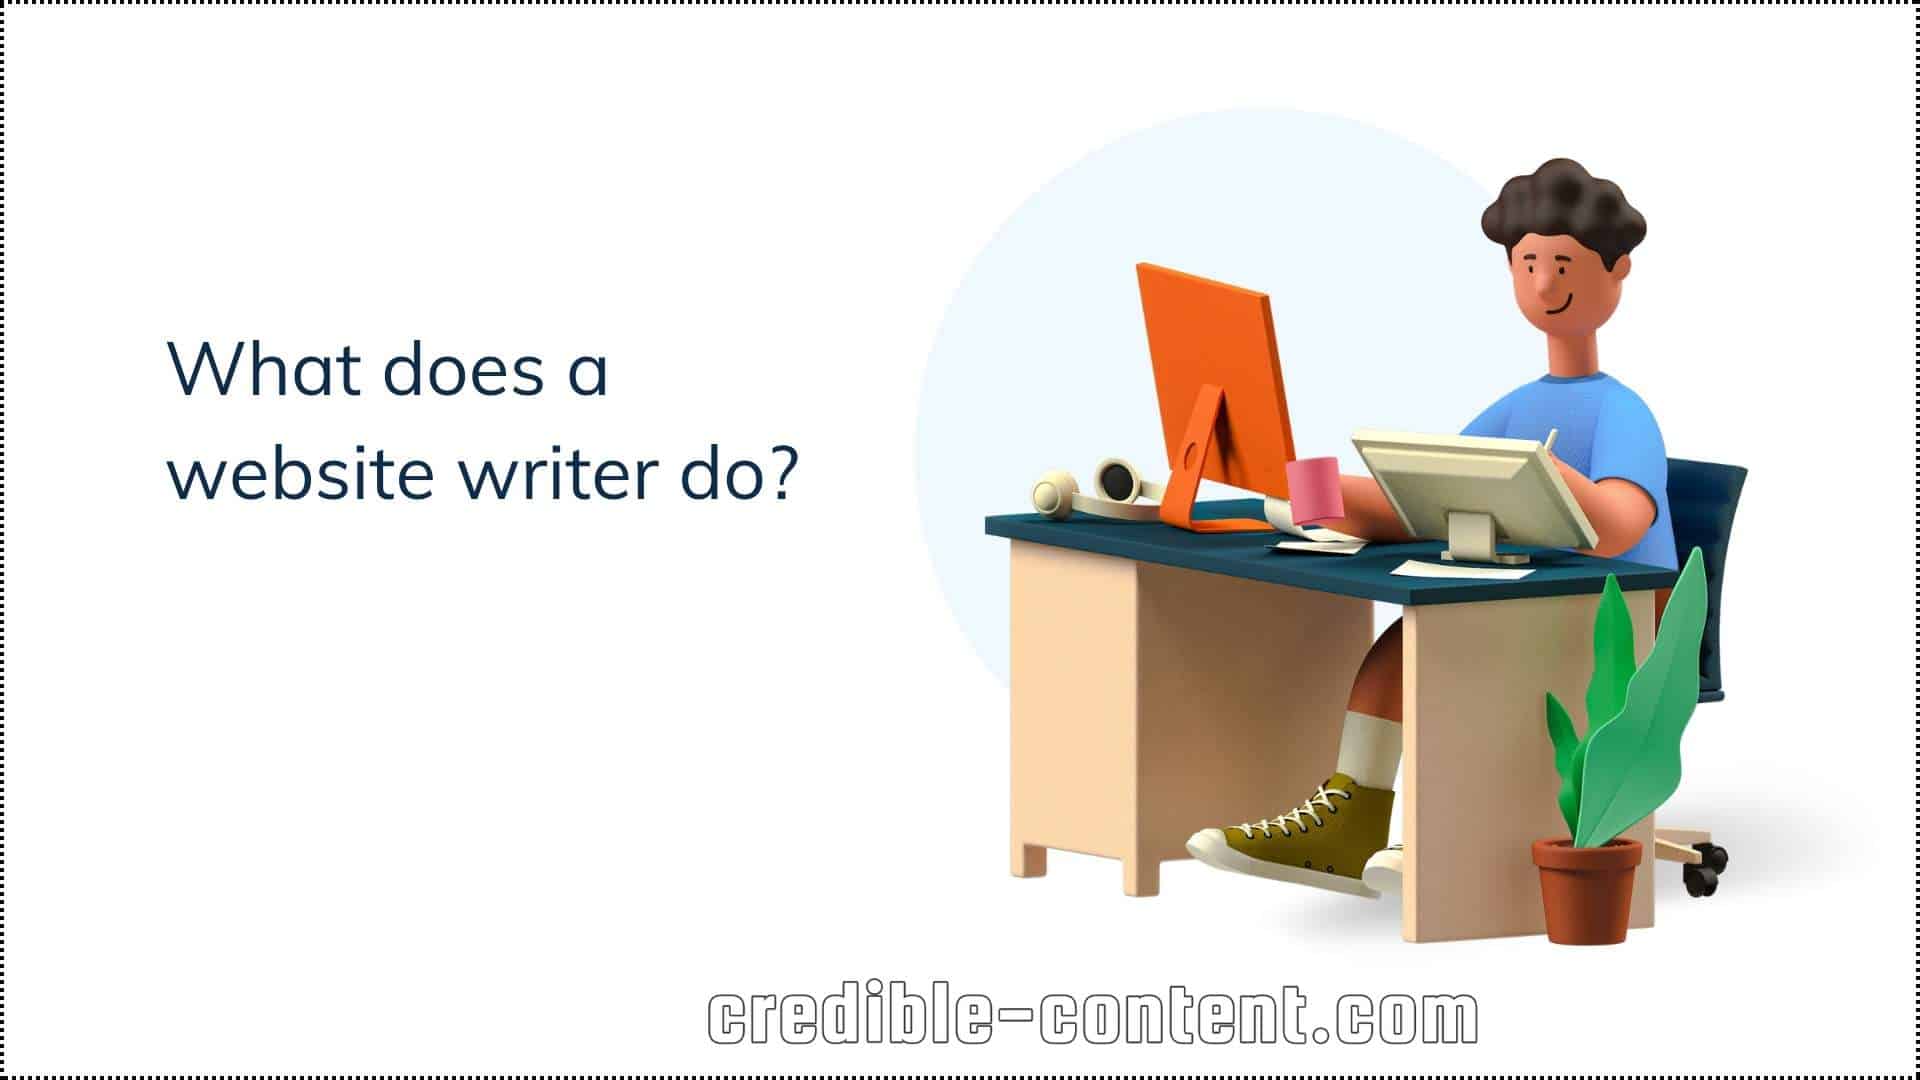 What does a website writer do